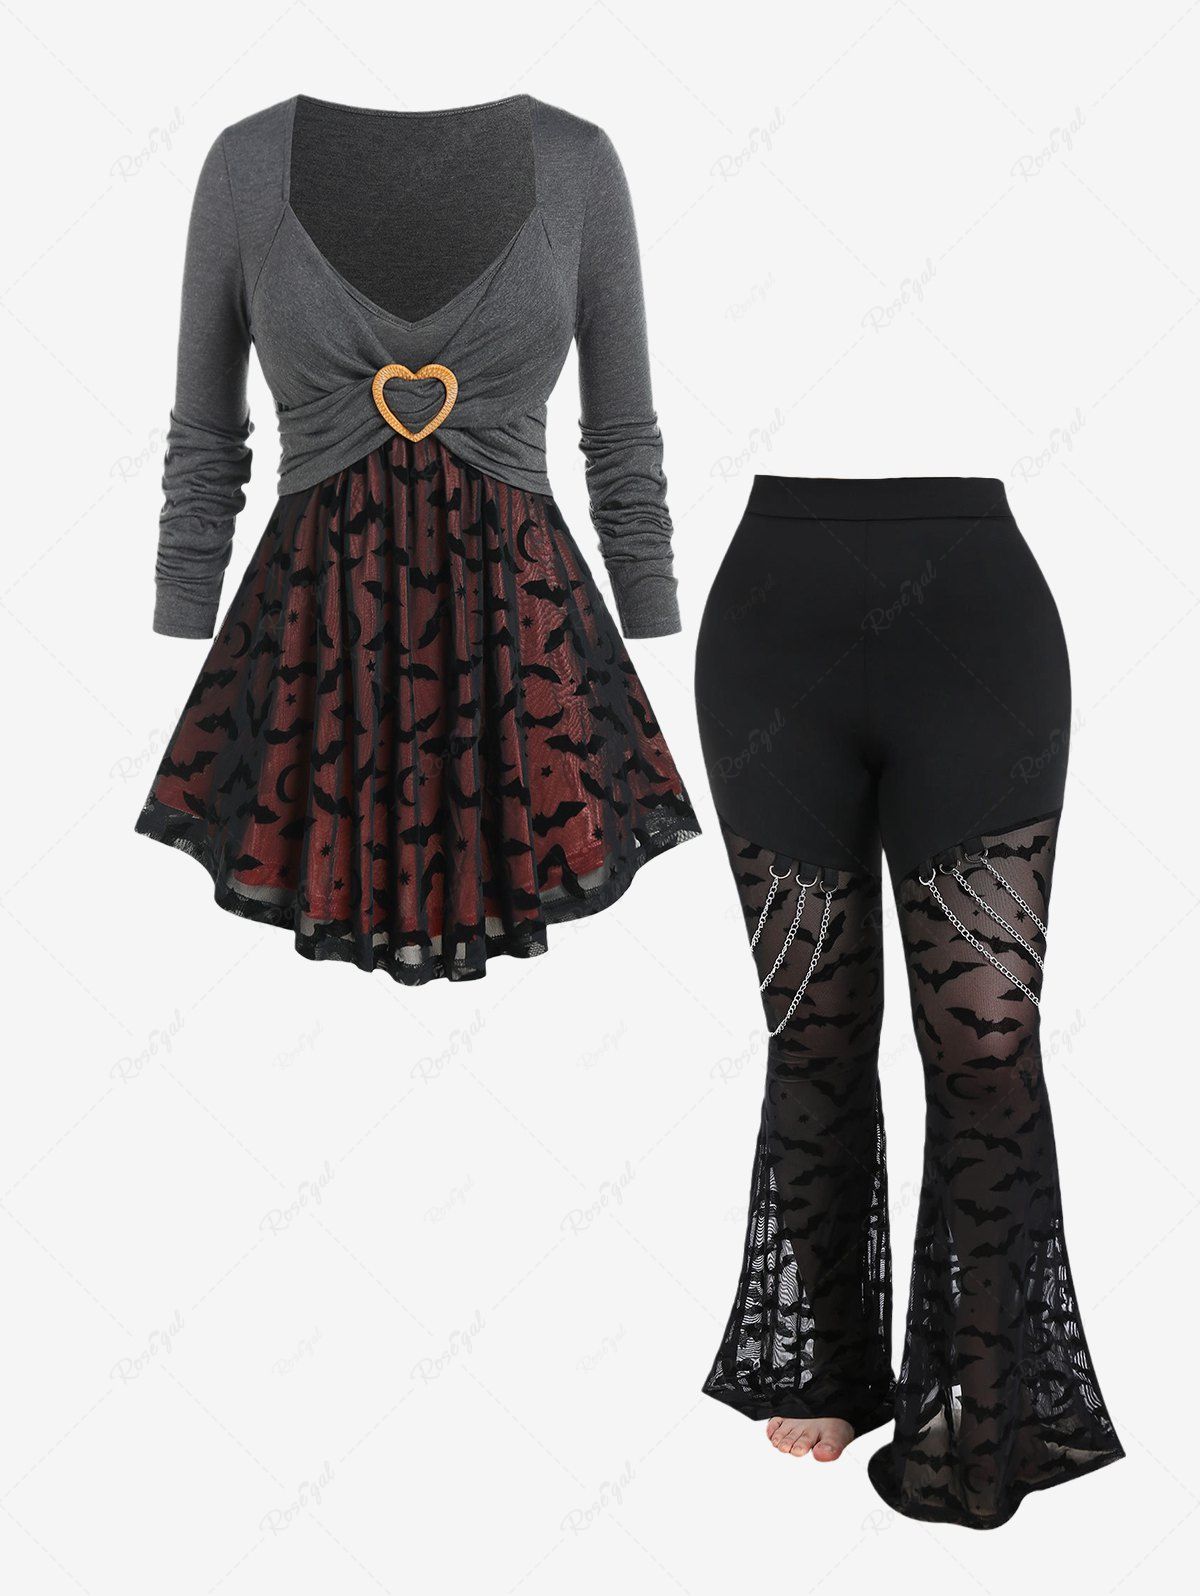 Discount Heart Ring Crossover Bat Mesh Panel Tee and Gothic Bats Pattern Lace Panel Chains Flare Pants Outfit  